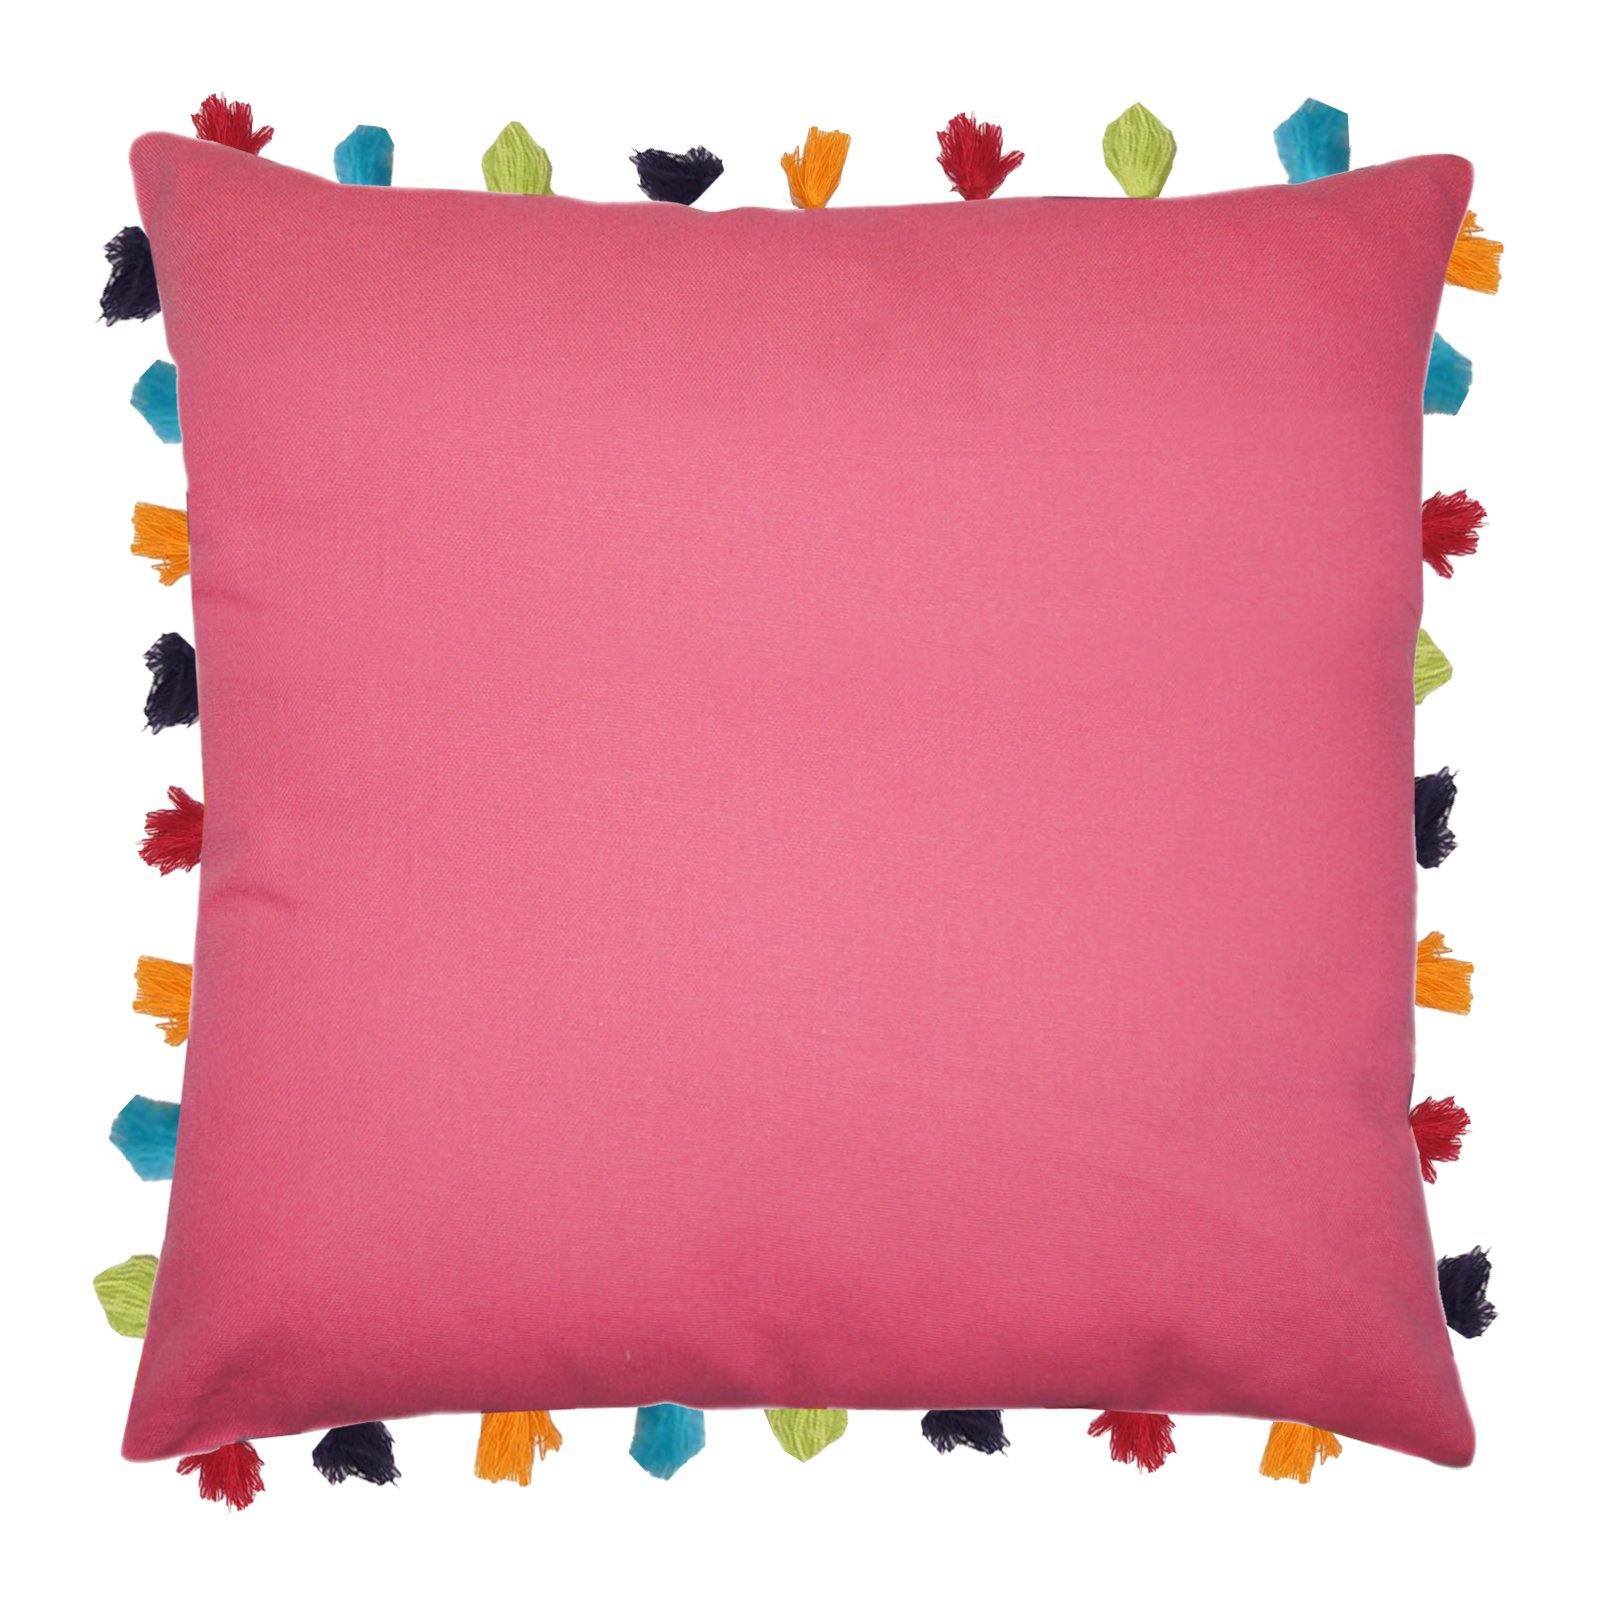 Lushomes Rasberry Cushion Cover with Colorful tassels (Single pc, 24 x 24”) - Lushomes